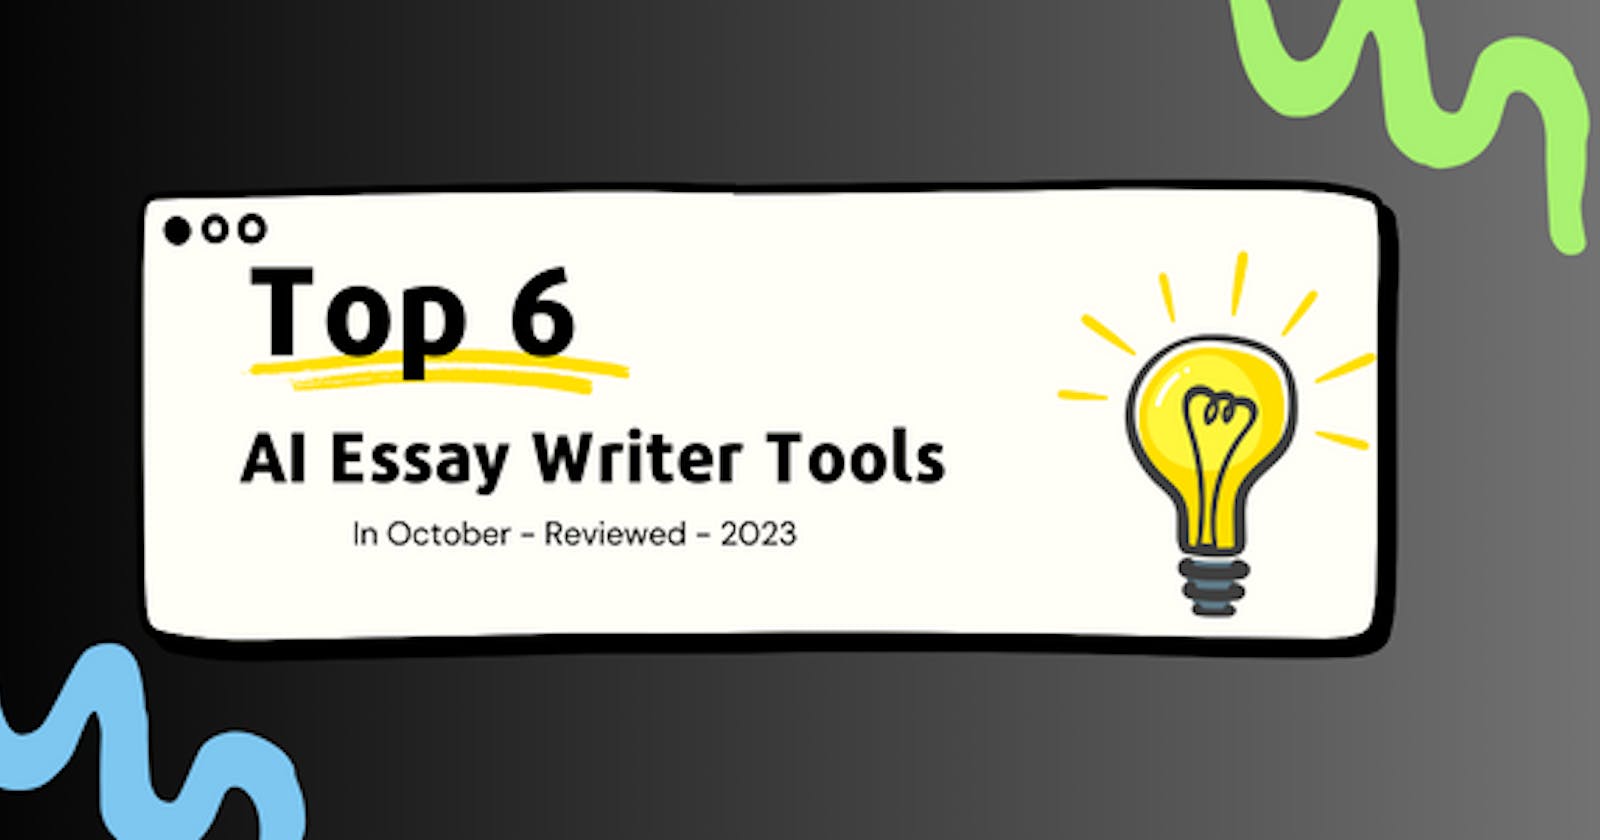 Discover the Most Promising AI Essay Writer Tools for October 2023